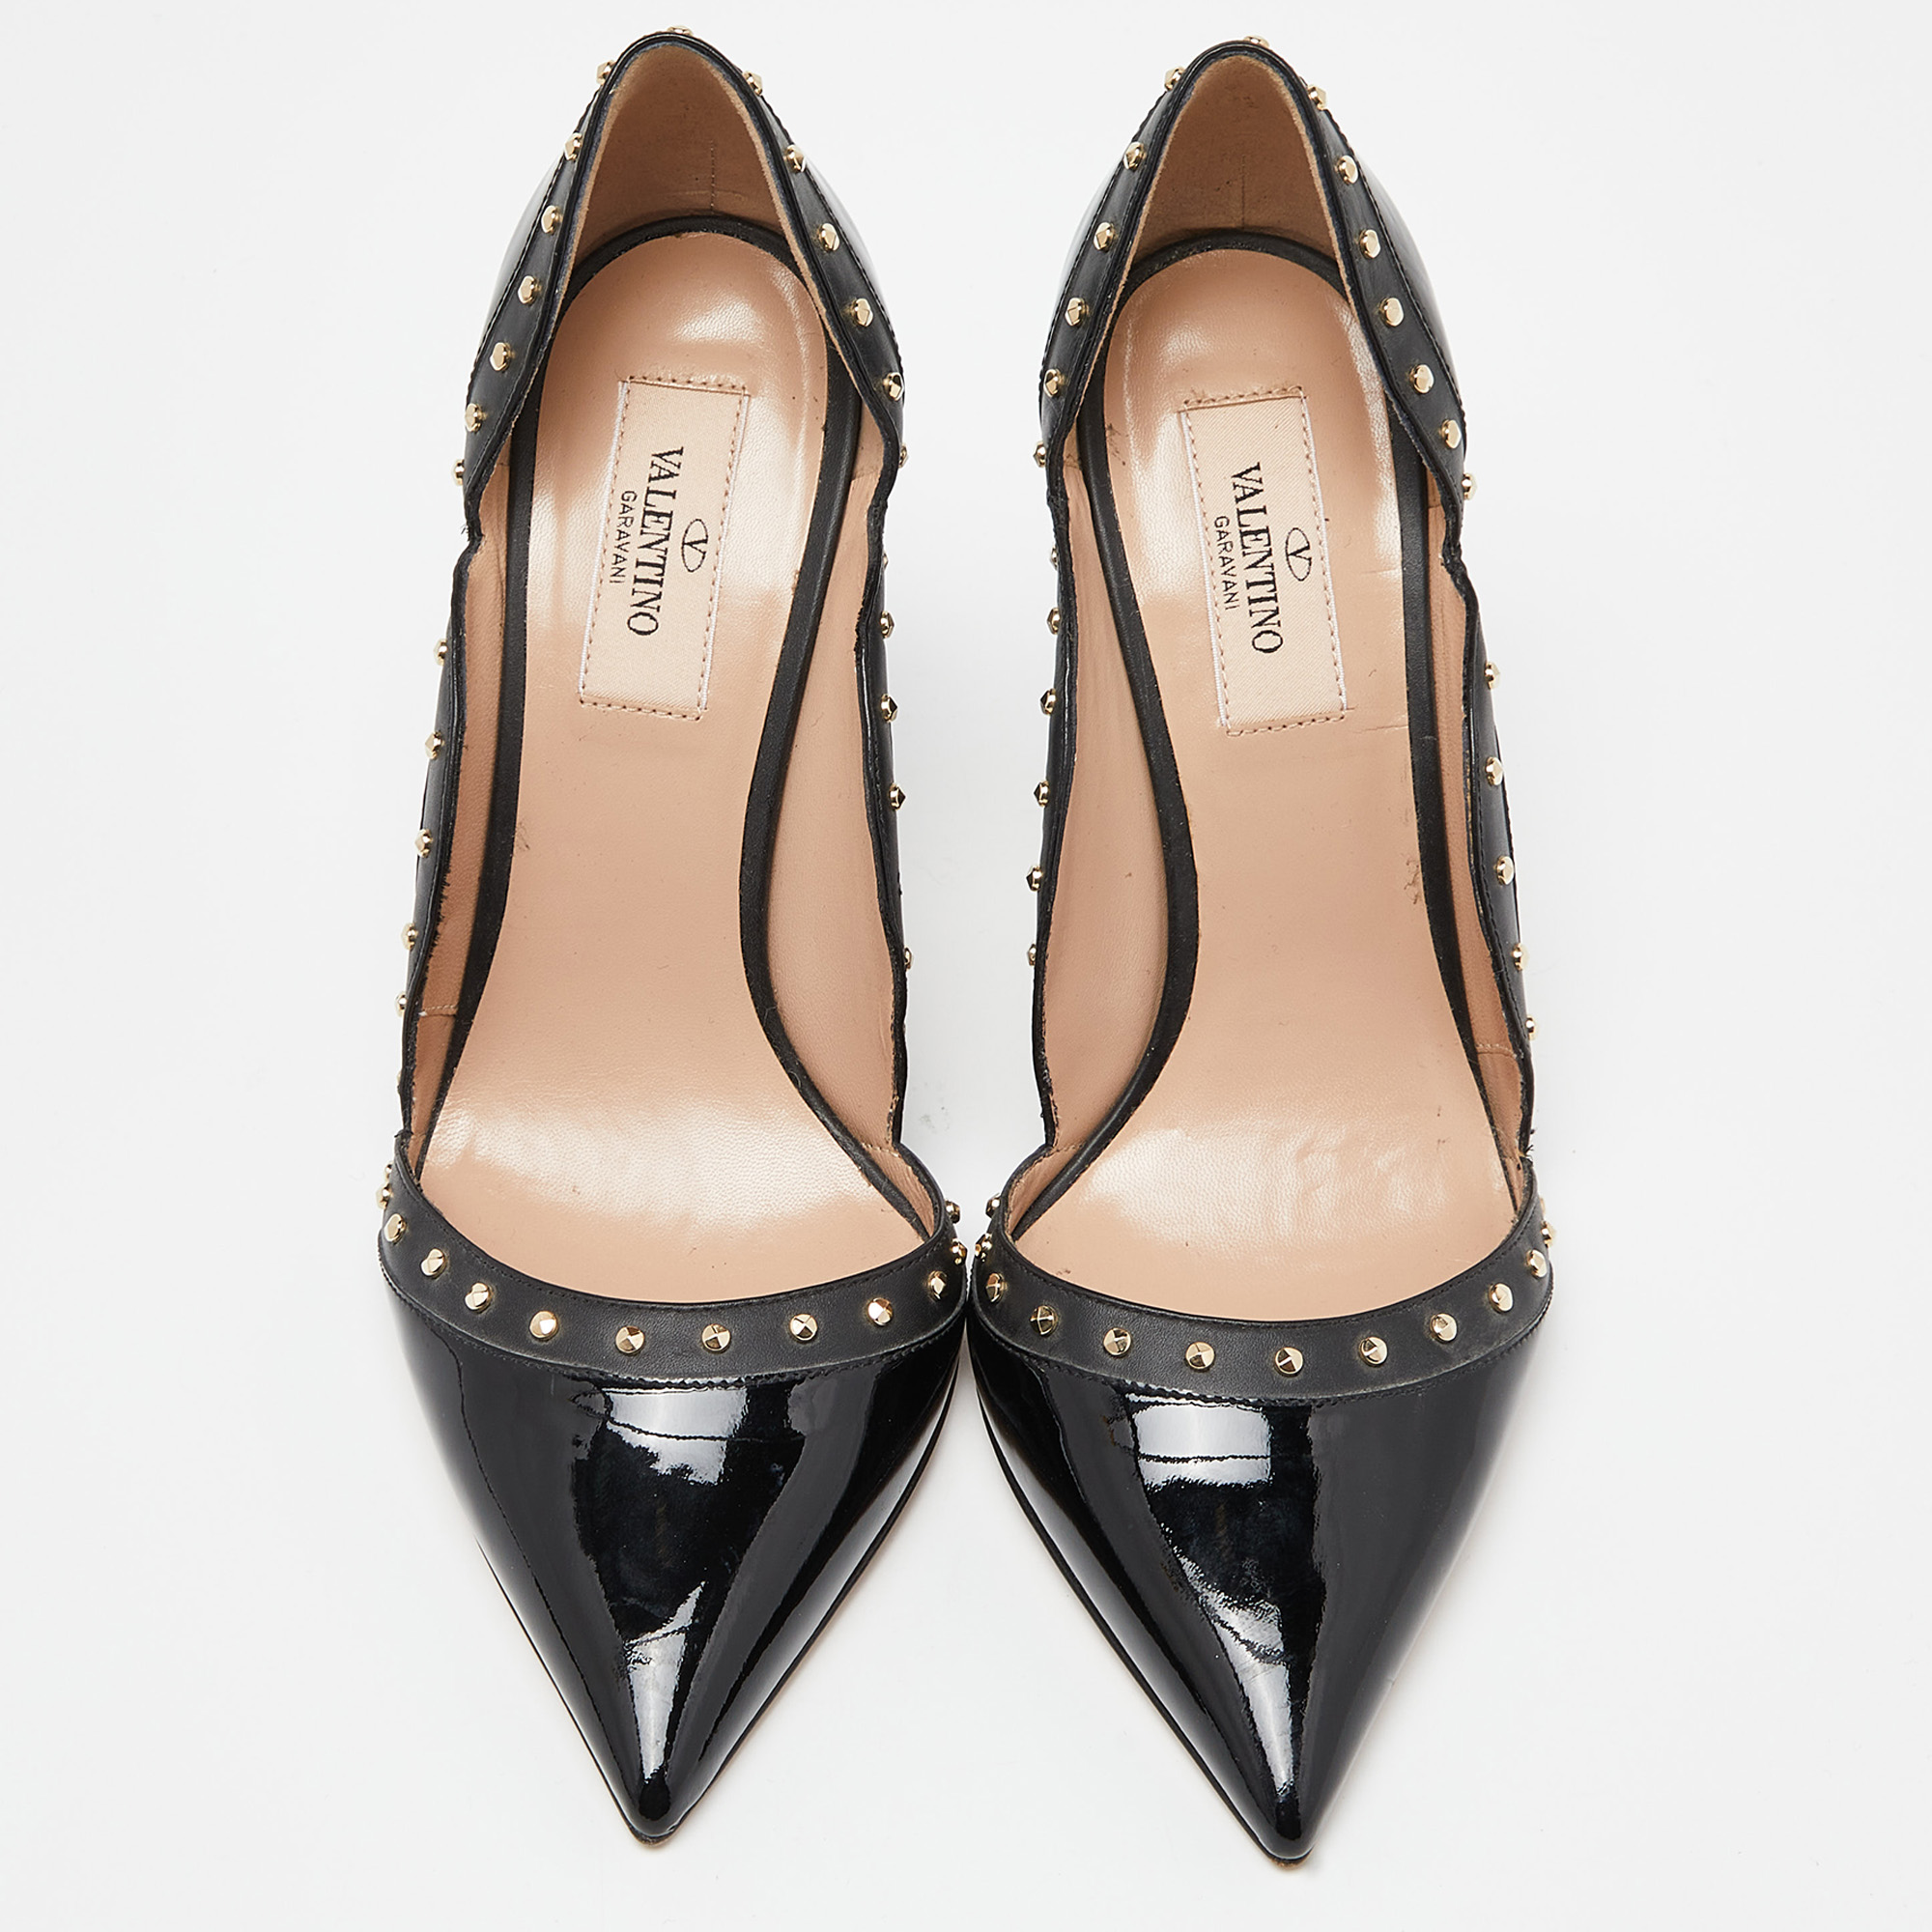 Valentino Black Patent And Leather Studded Pointed Toe Pumps Size 38